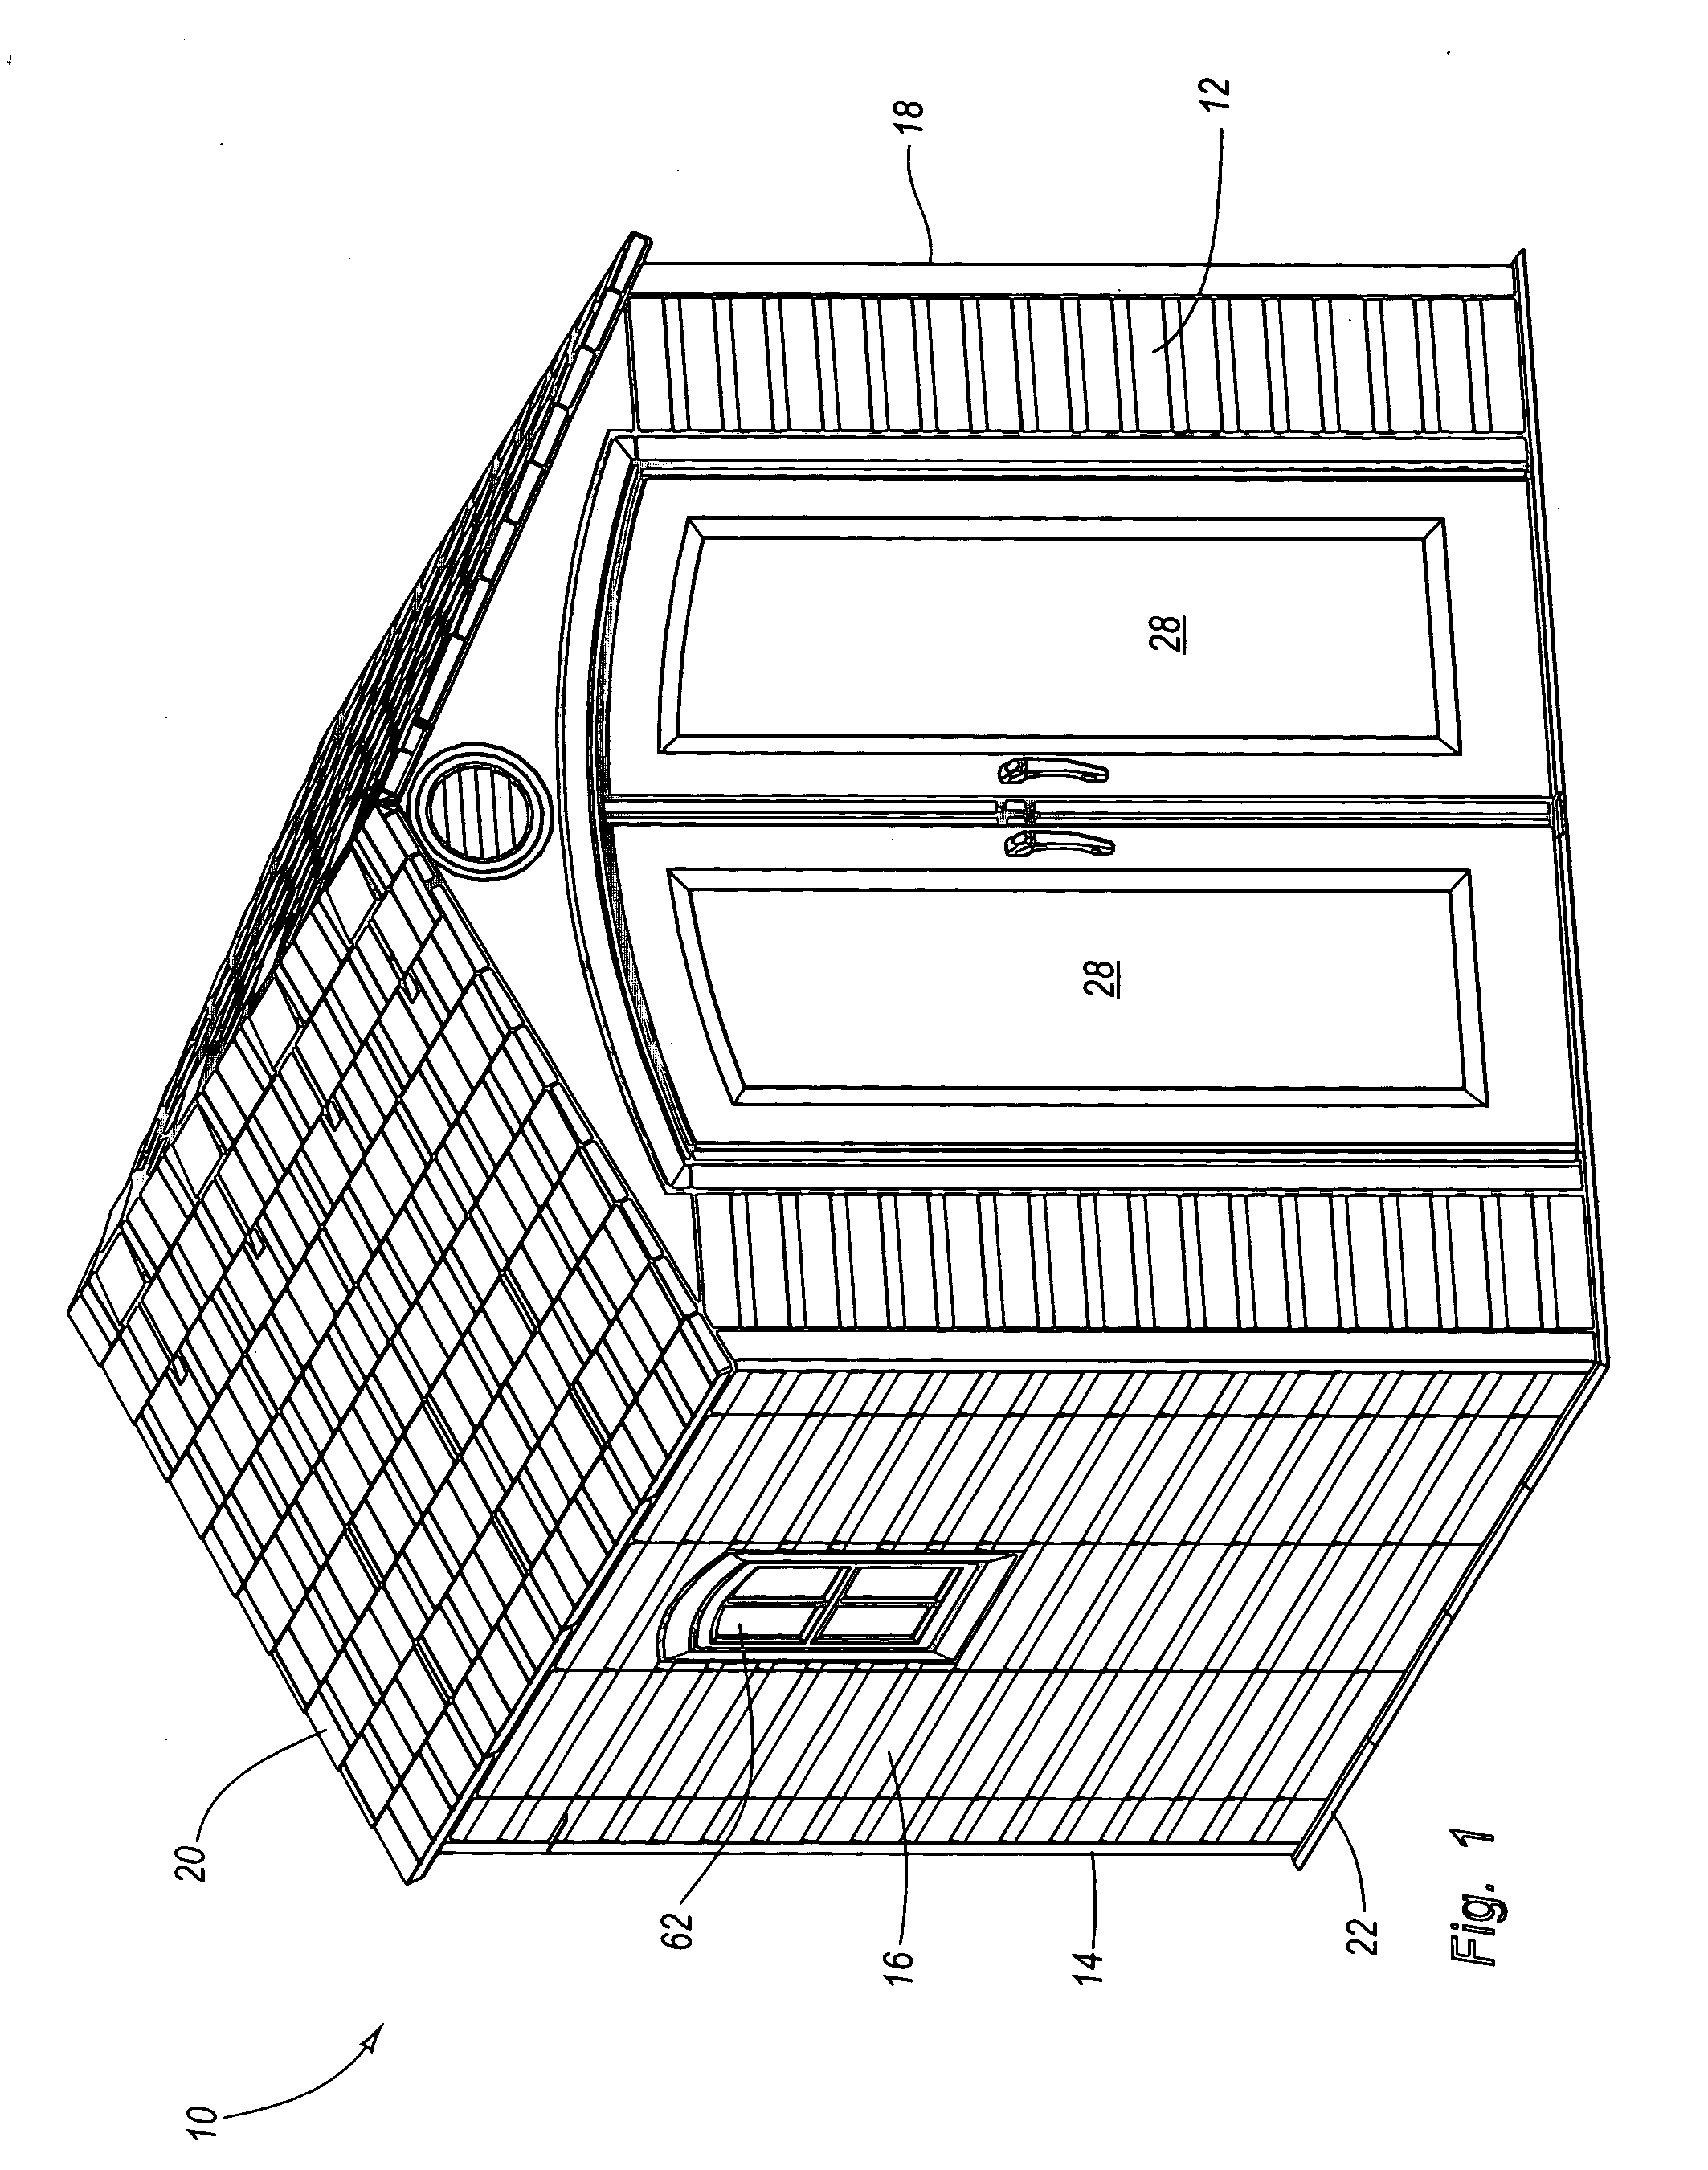 Packaging system for a modular enclosure